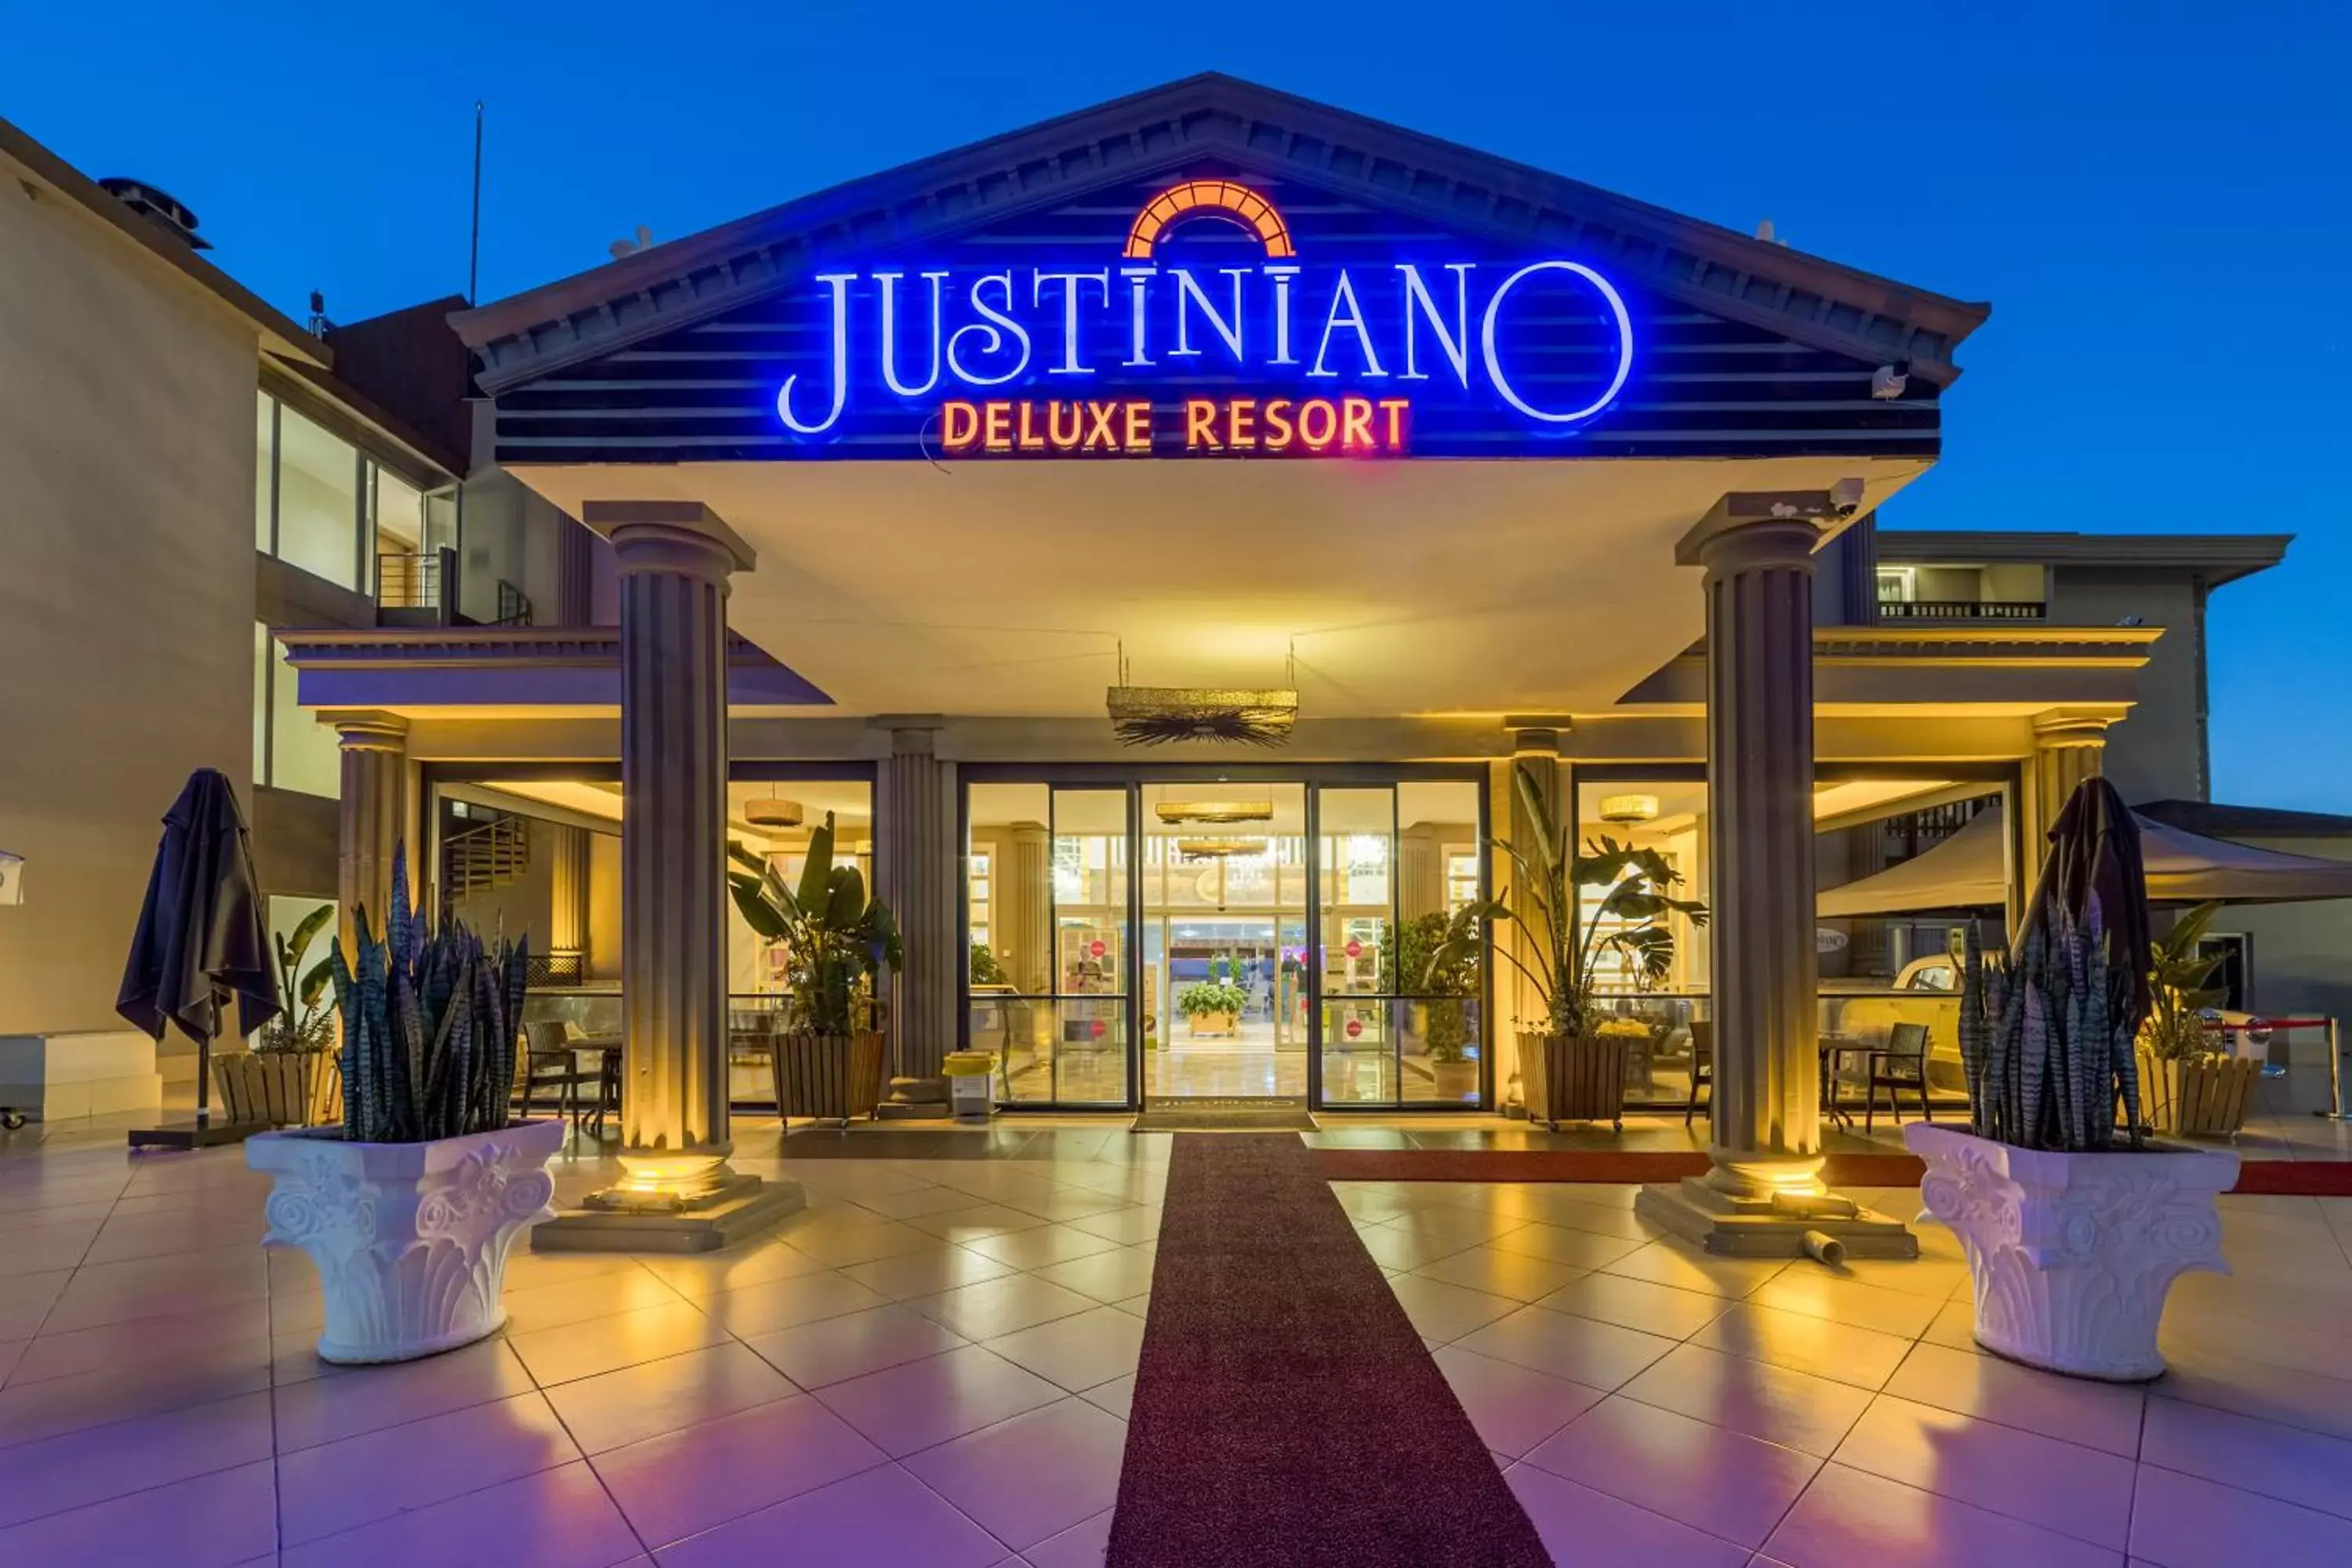 Property building in Justiniano Deluxe Resort